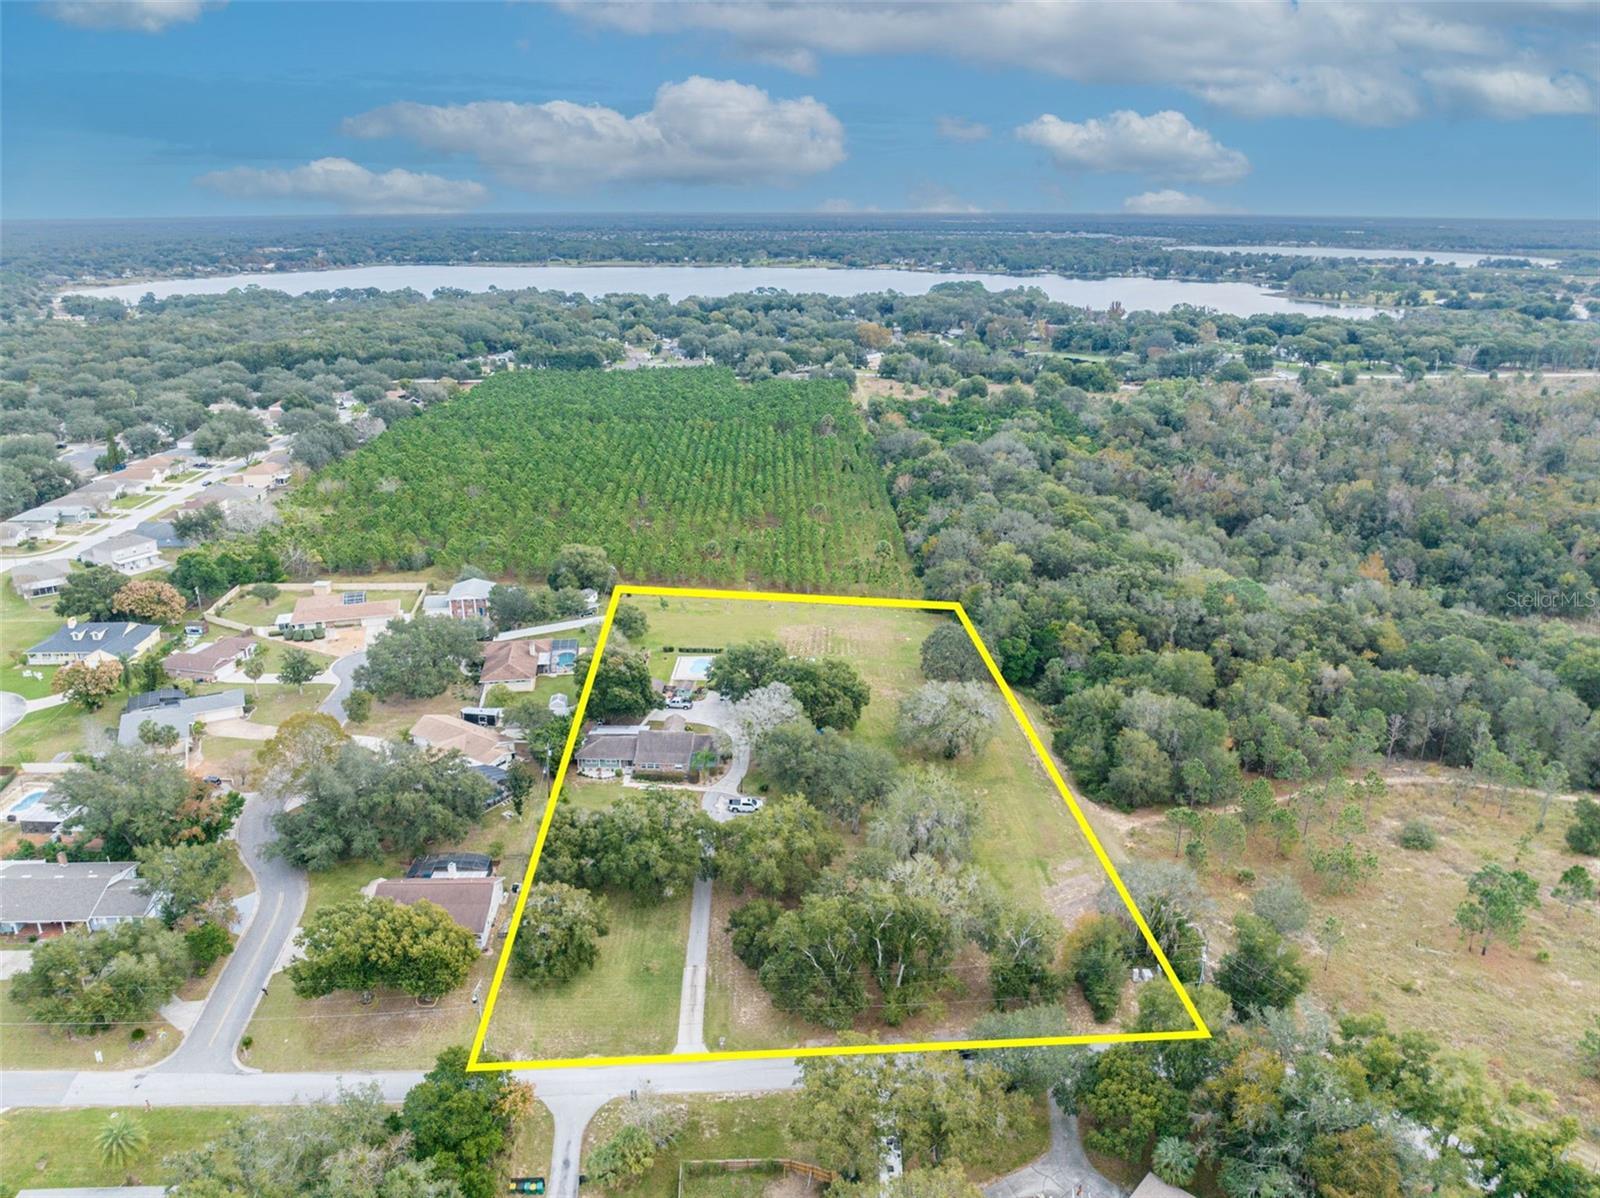 Photo one of 1211 Country Club Rd Eustis FL 32726 | MLS O6163040